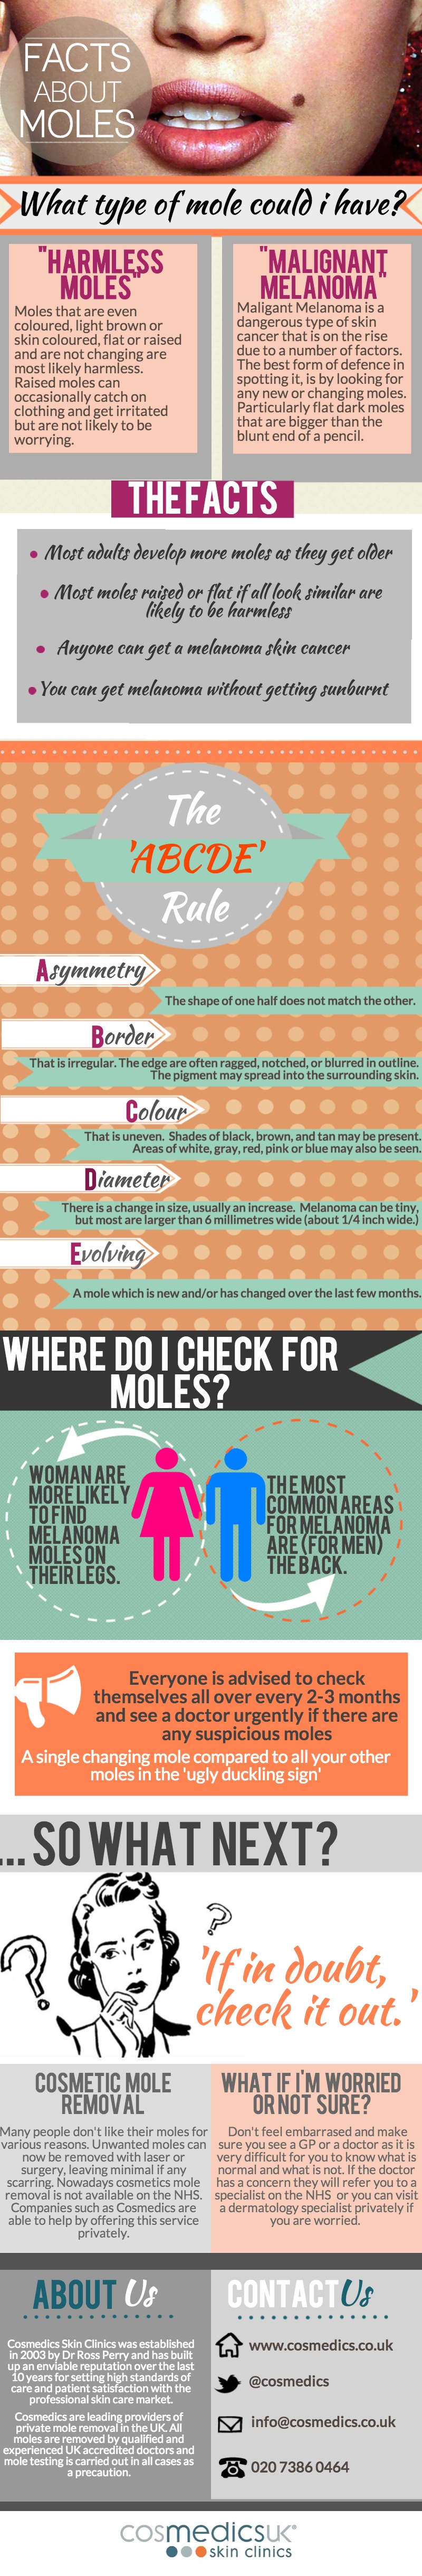 Facts About Moles Infographic